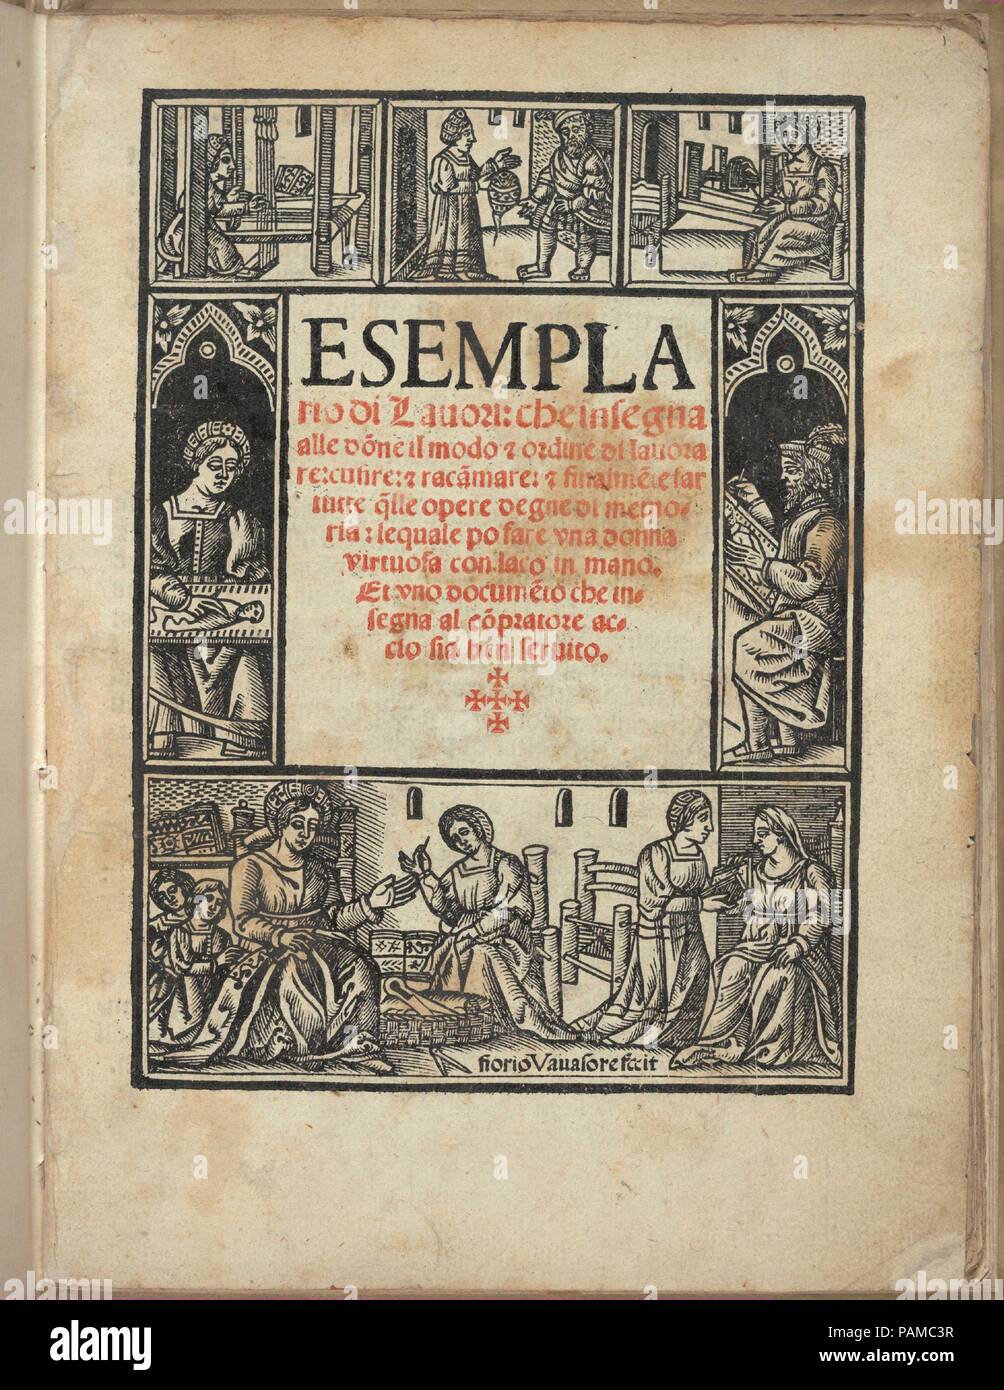 Esemplario di Lauori..., title page (recto). Designer: Woodcut title signed by Florio Vavassore (Italian, active 16th century). Dimensions: Overall: 8 7/16 x 6 5/16 in. (21.5 x 16 cm). Published in: Venice. Publisher: Giovanni Andrea Vavassore (Italian, active Venice 1530-1573) , Venice. Date: August 1, 1532.  Originally published by Giovanni Andrea Vavassore, Italian, active 16th century, Venice, designed by Florio Vavassore (Giovanni's brother), Italian, active 16th century. Reiussed by Macmillan & Co., British, London and New York.  From top to bottom, and left to right:  Title page is comp Stock Photo